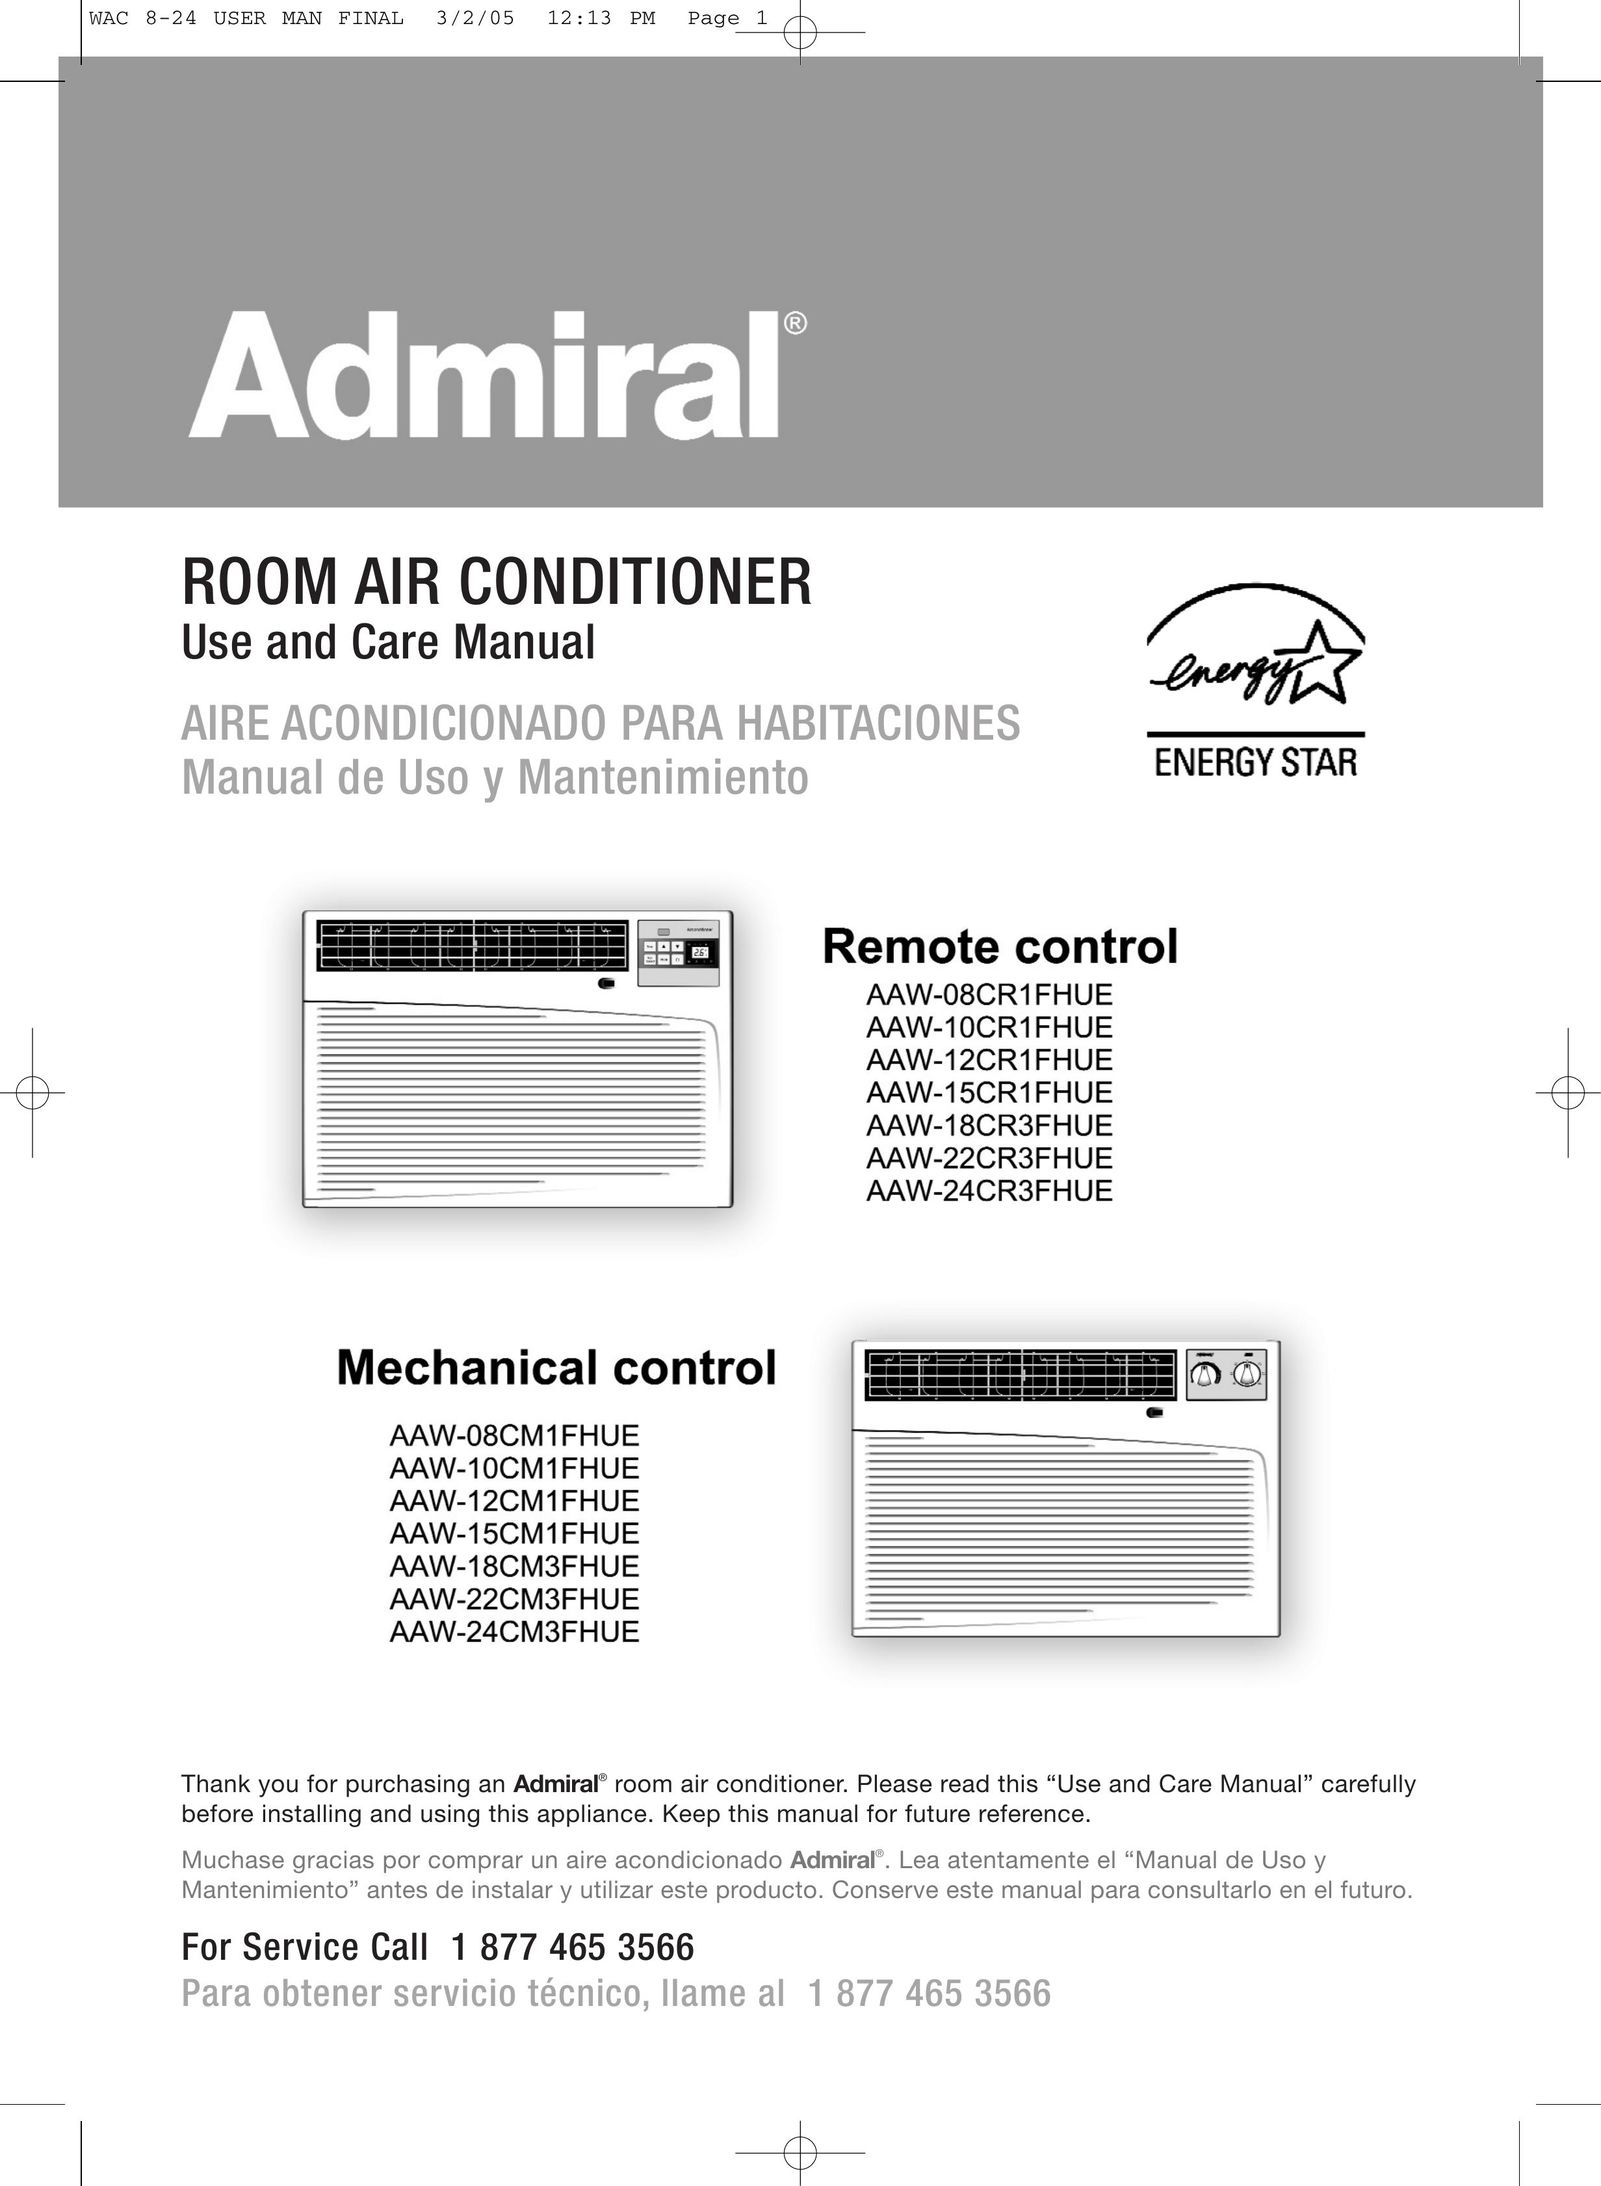 Admiral AAW-15CM1FHUE Air Conditioner User Manual